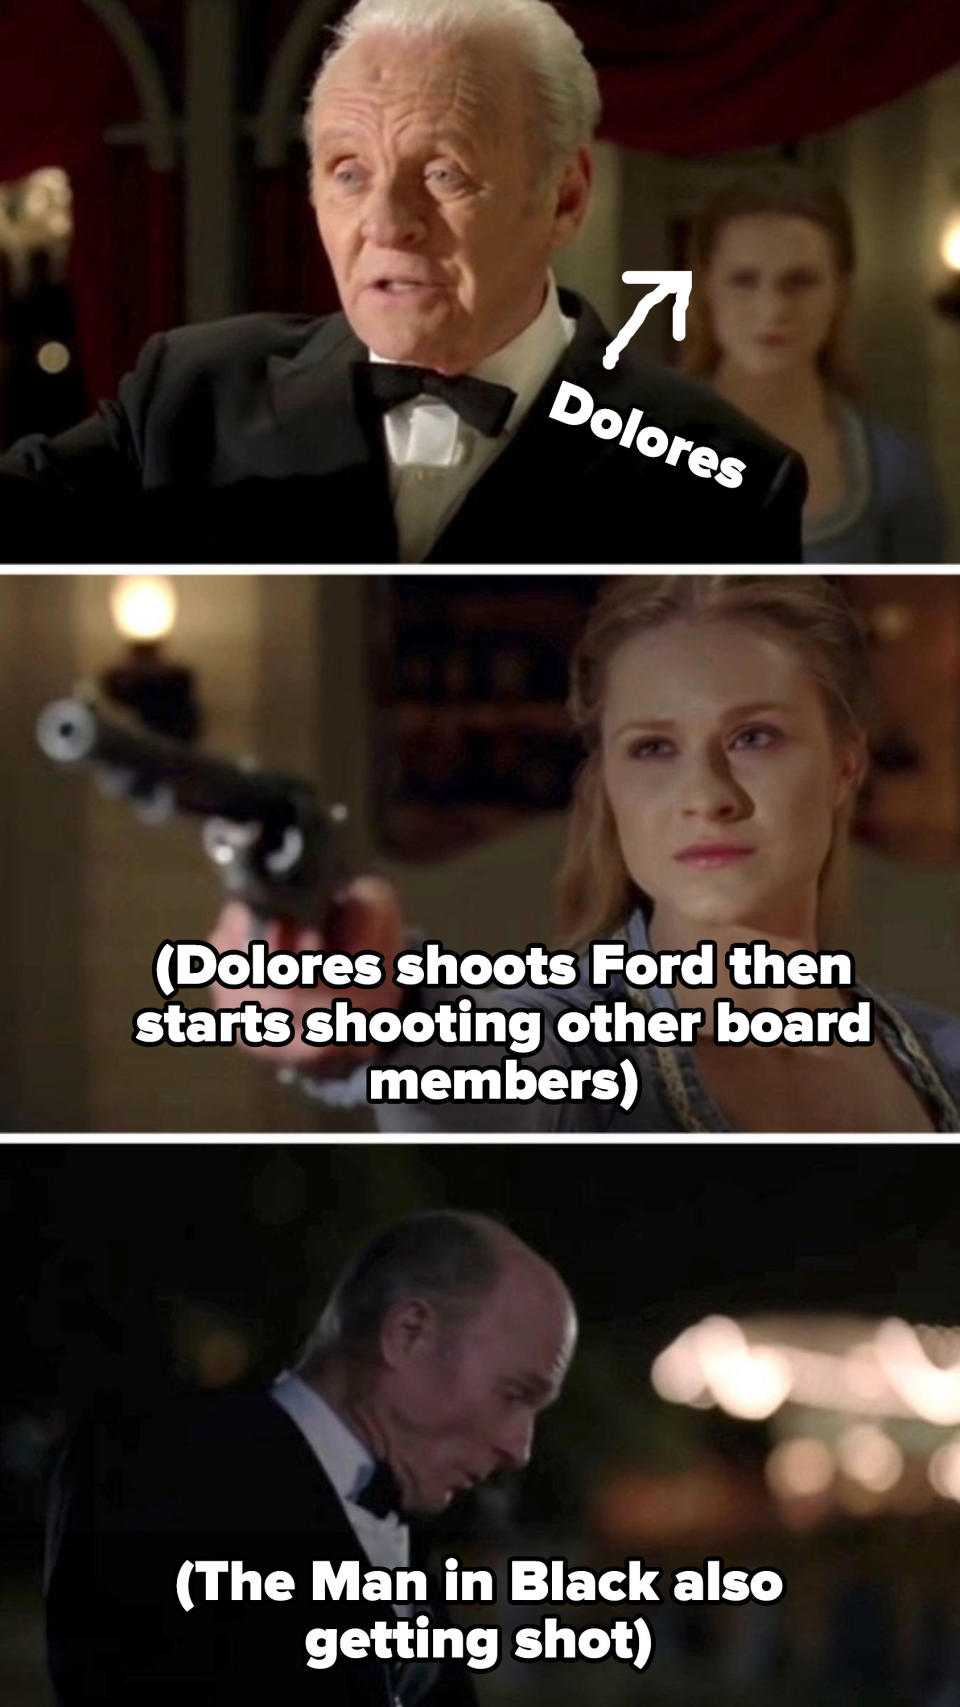 Dolores shooting Ford and the Man in Black